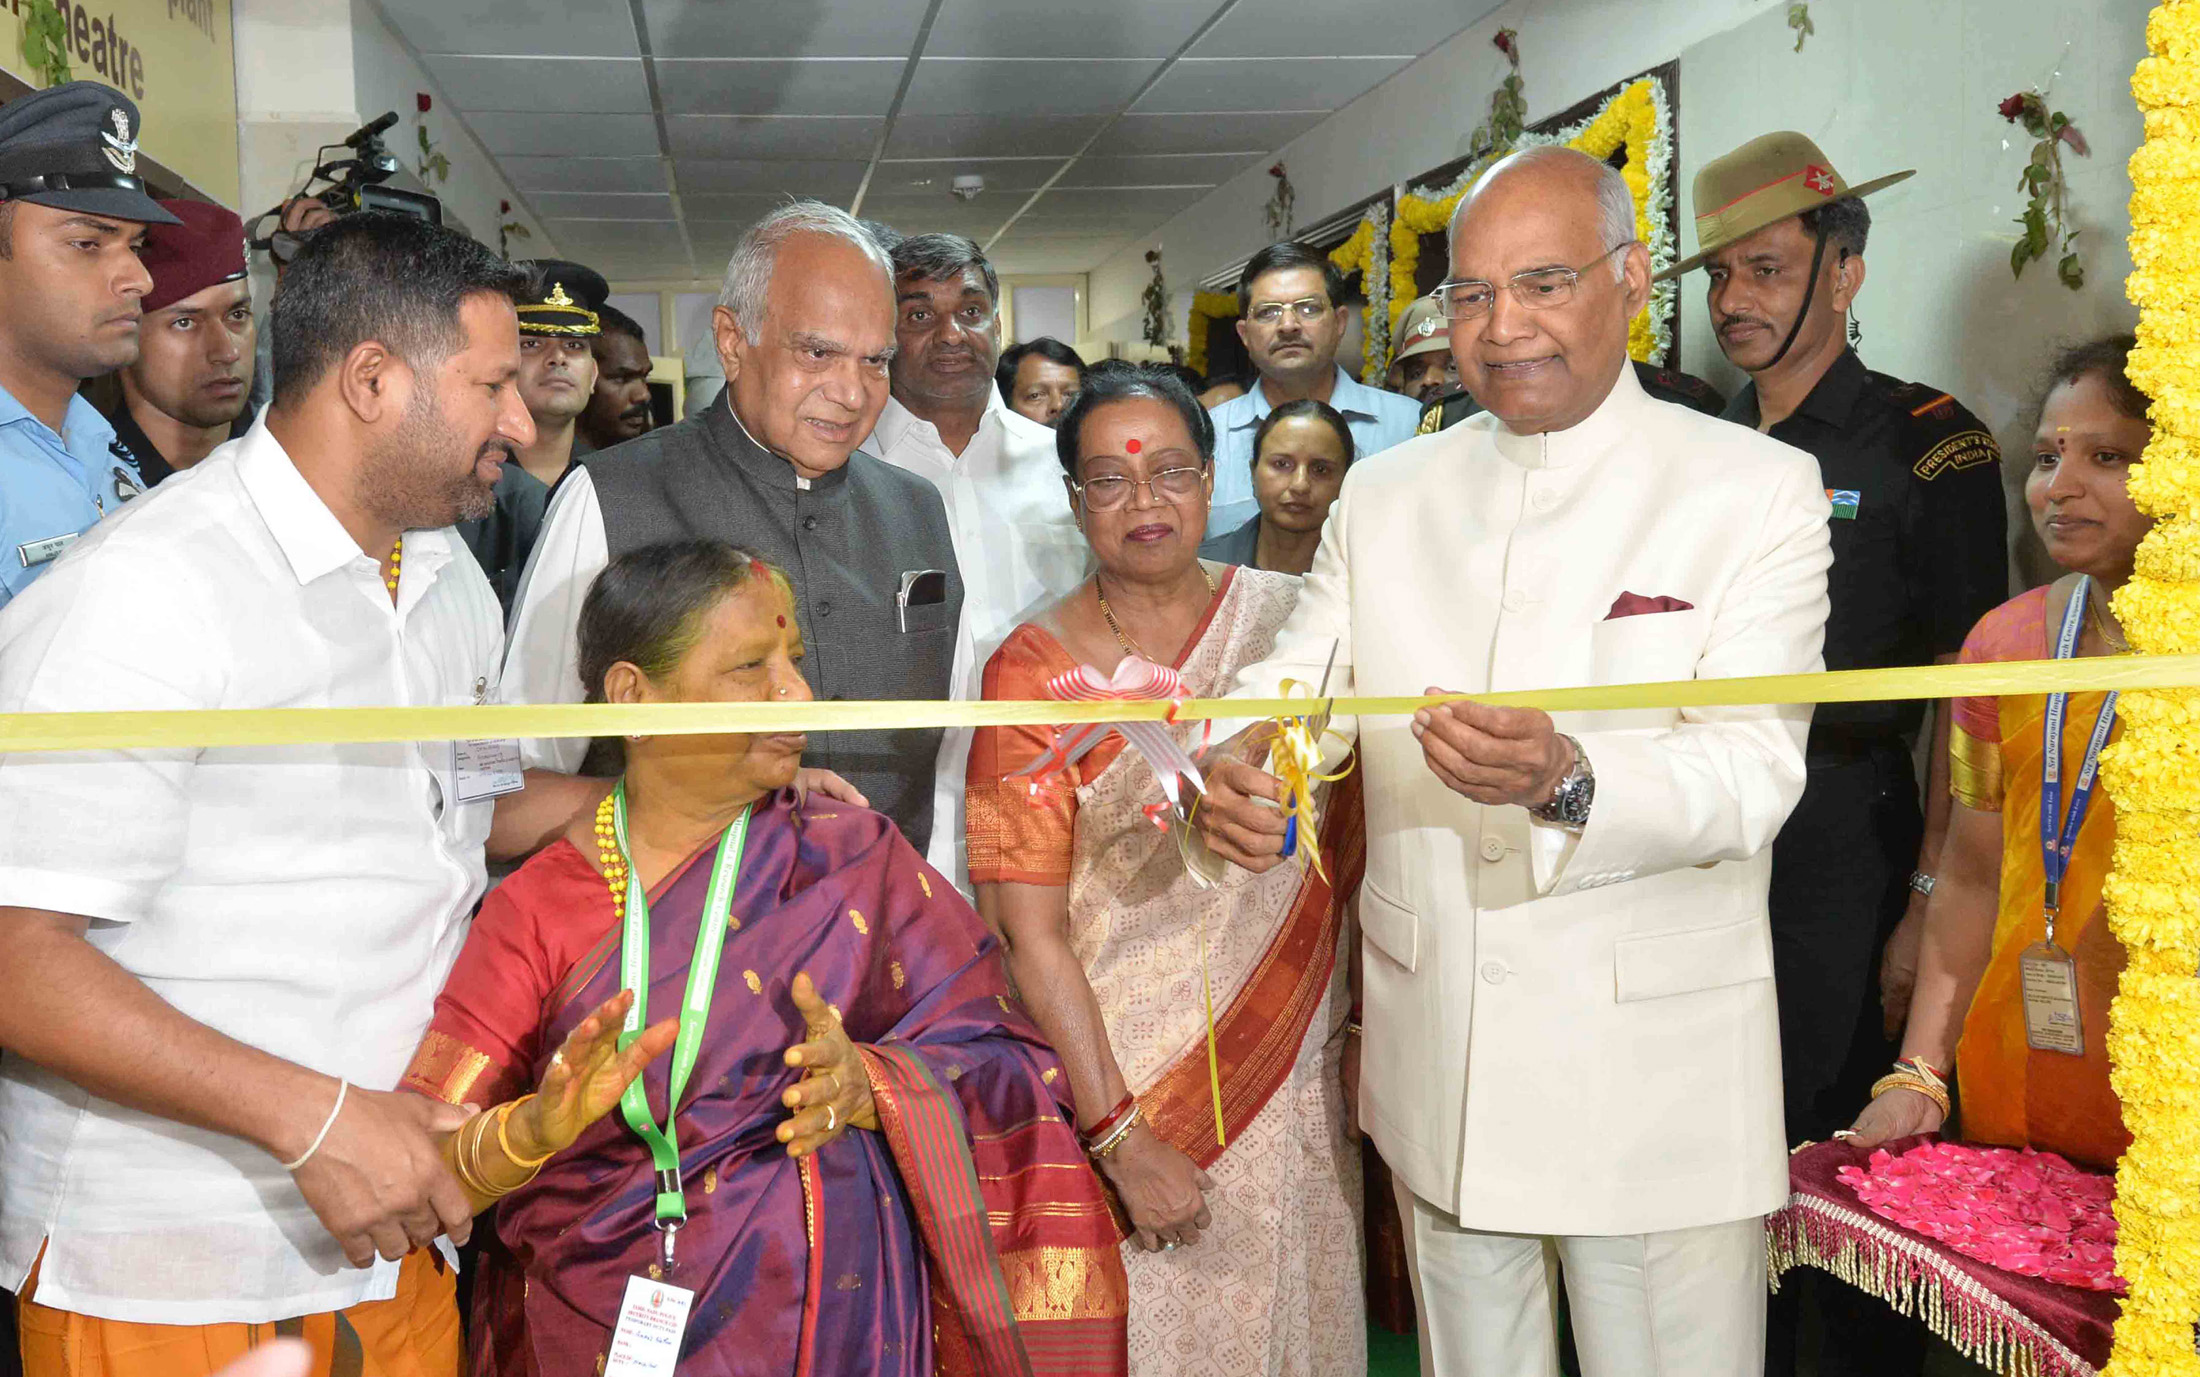 The President, Shri Ram Nath Kovind inaugurating the Kidney Transplant Unit and Cardiac Unit of the Sri Narayani Hospital and Research Centre, Thirumalaikodi, at Vellore, in Tamil Nadu on May 04, 2018. The Governor of Tamil Nadu, Shri Banwarilal Purohit is also seen.